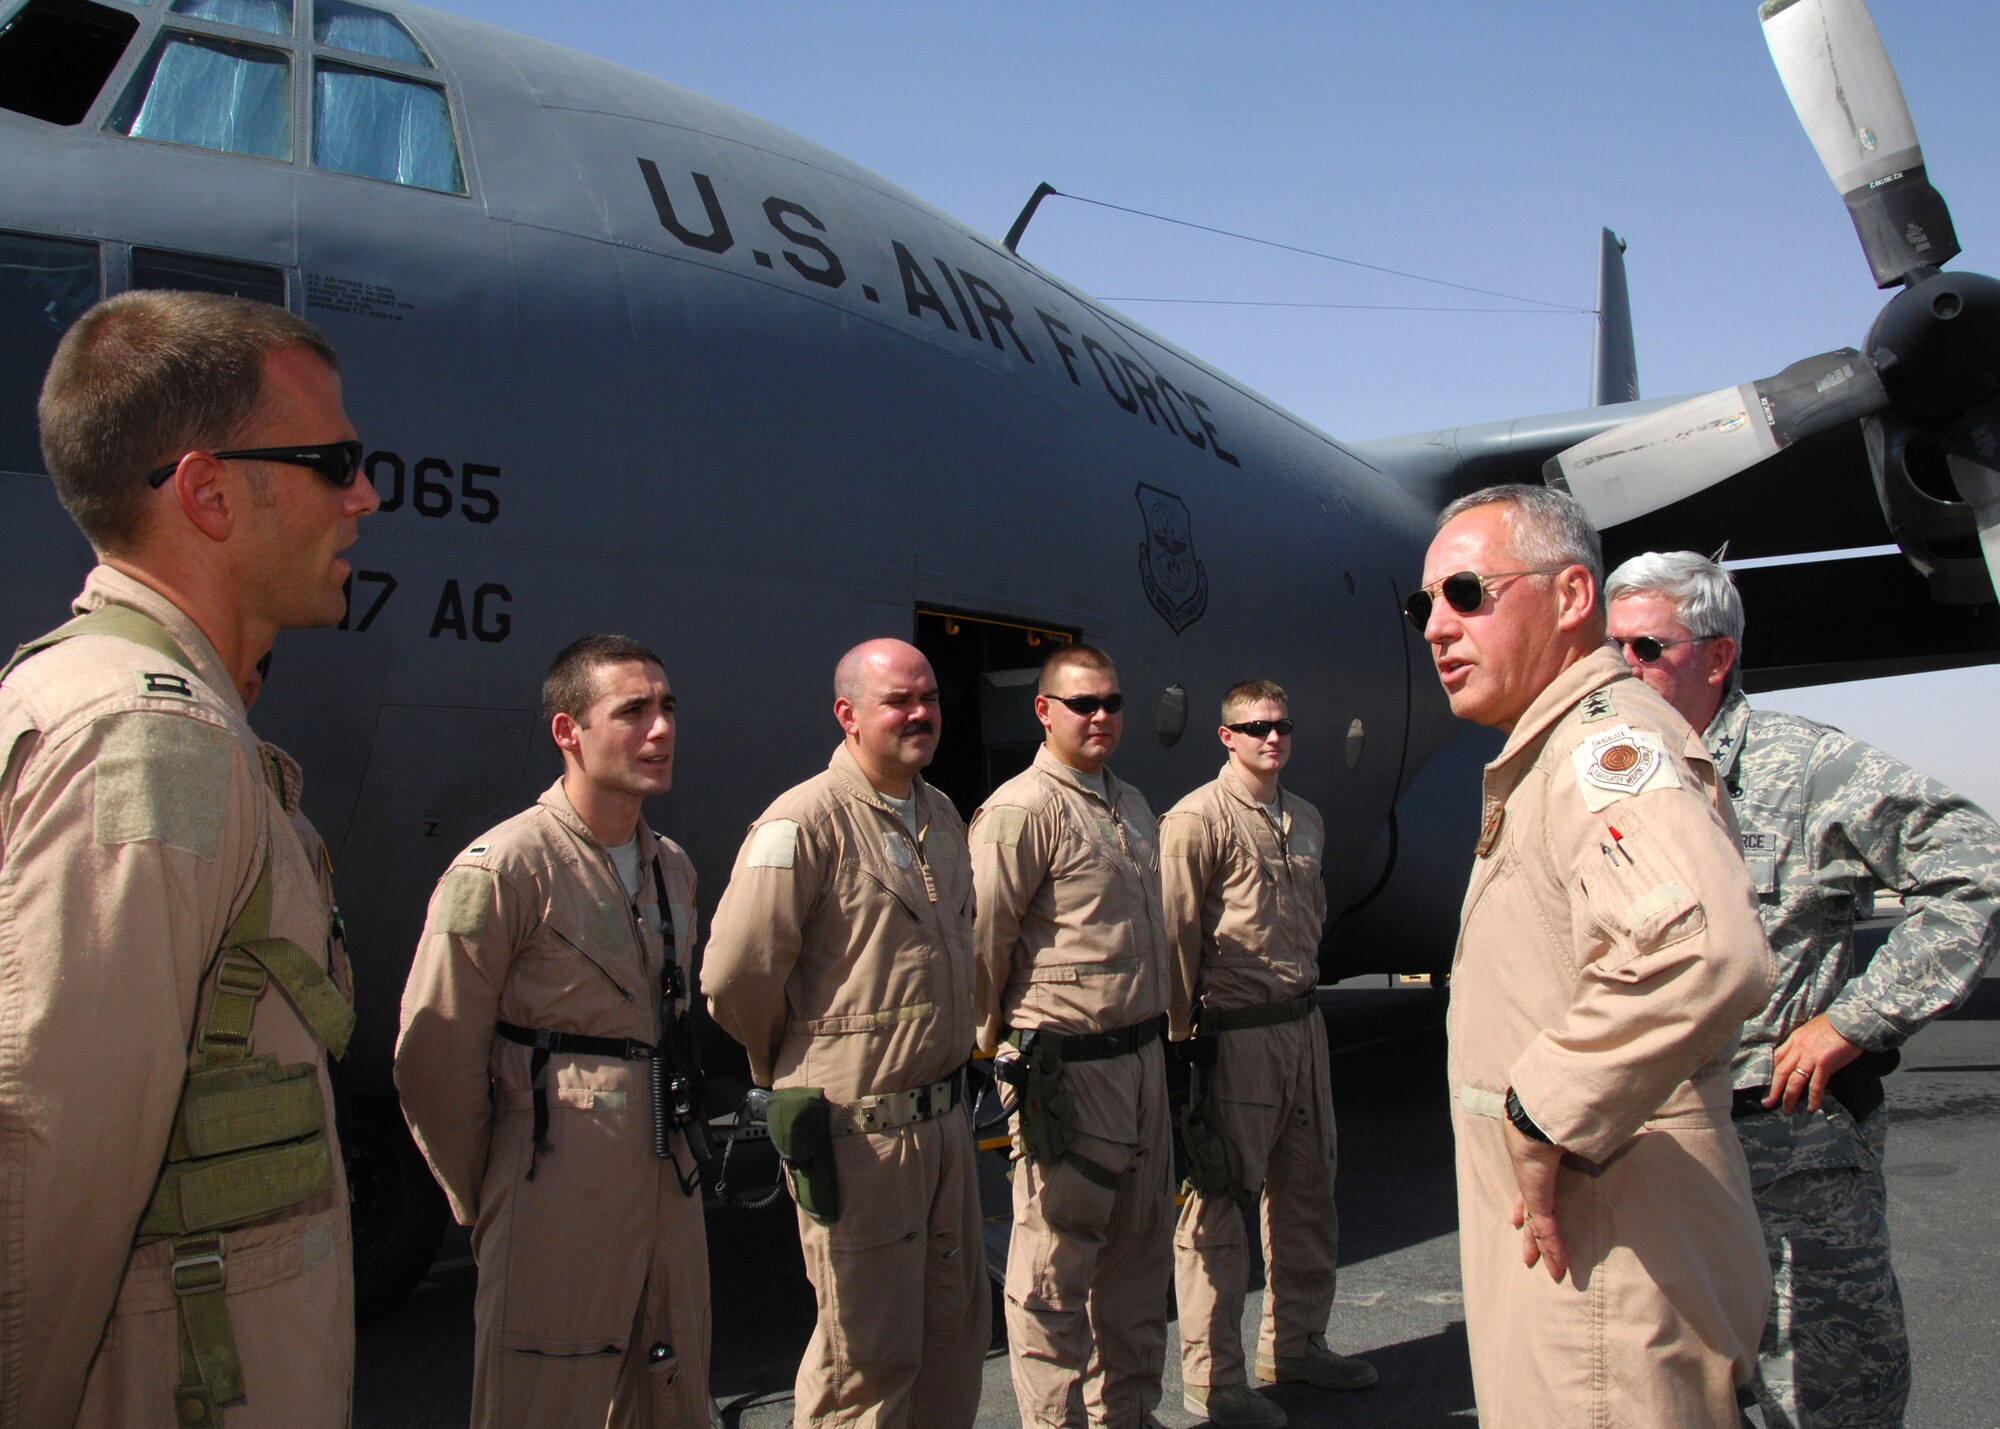 SOUTHWEST ASIA -- Gen. Bruce Carlson, commander of Air Force Materiel Command, visits with a C-130 crew prior to a mission to Iraq on Aug. 18 at an air base in Southwest Asia. General Carlson met with members of the 386th Air Expeditionary Wing to see how AFMC can assist with current operations in the U.S. Central Command area of responsibility. (U.S. Air Force photo/Tech. Sgt. Raheem Moore)